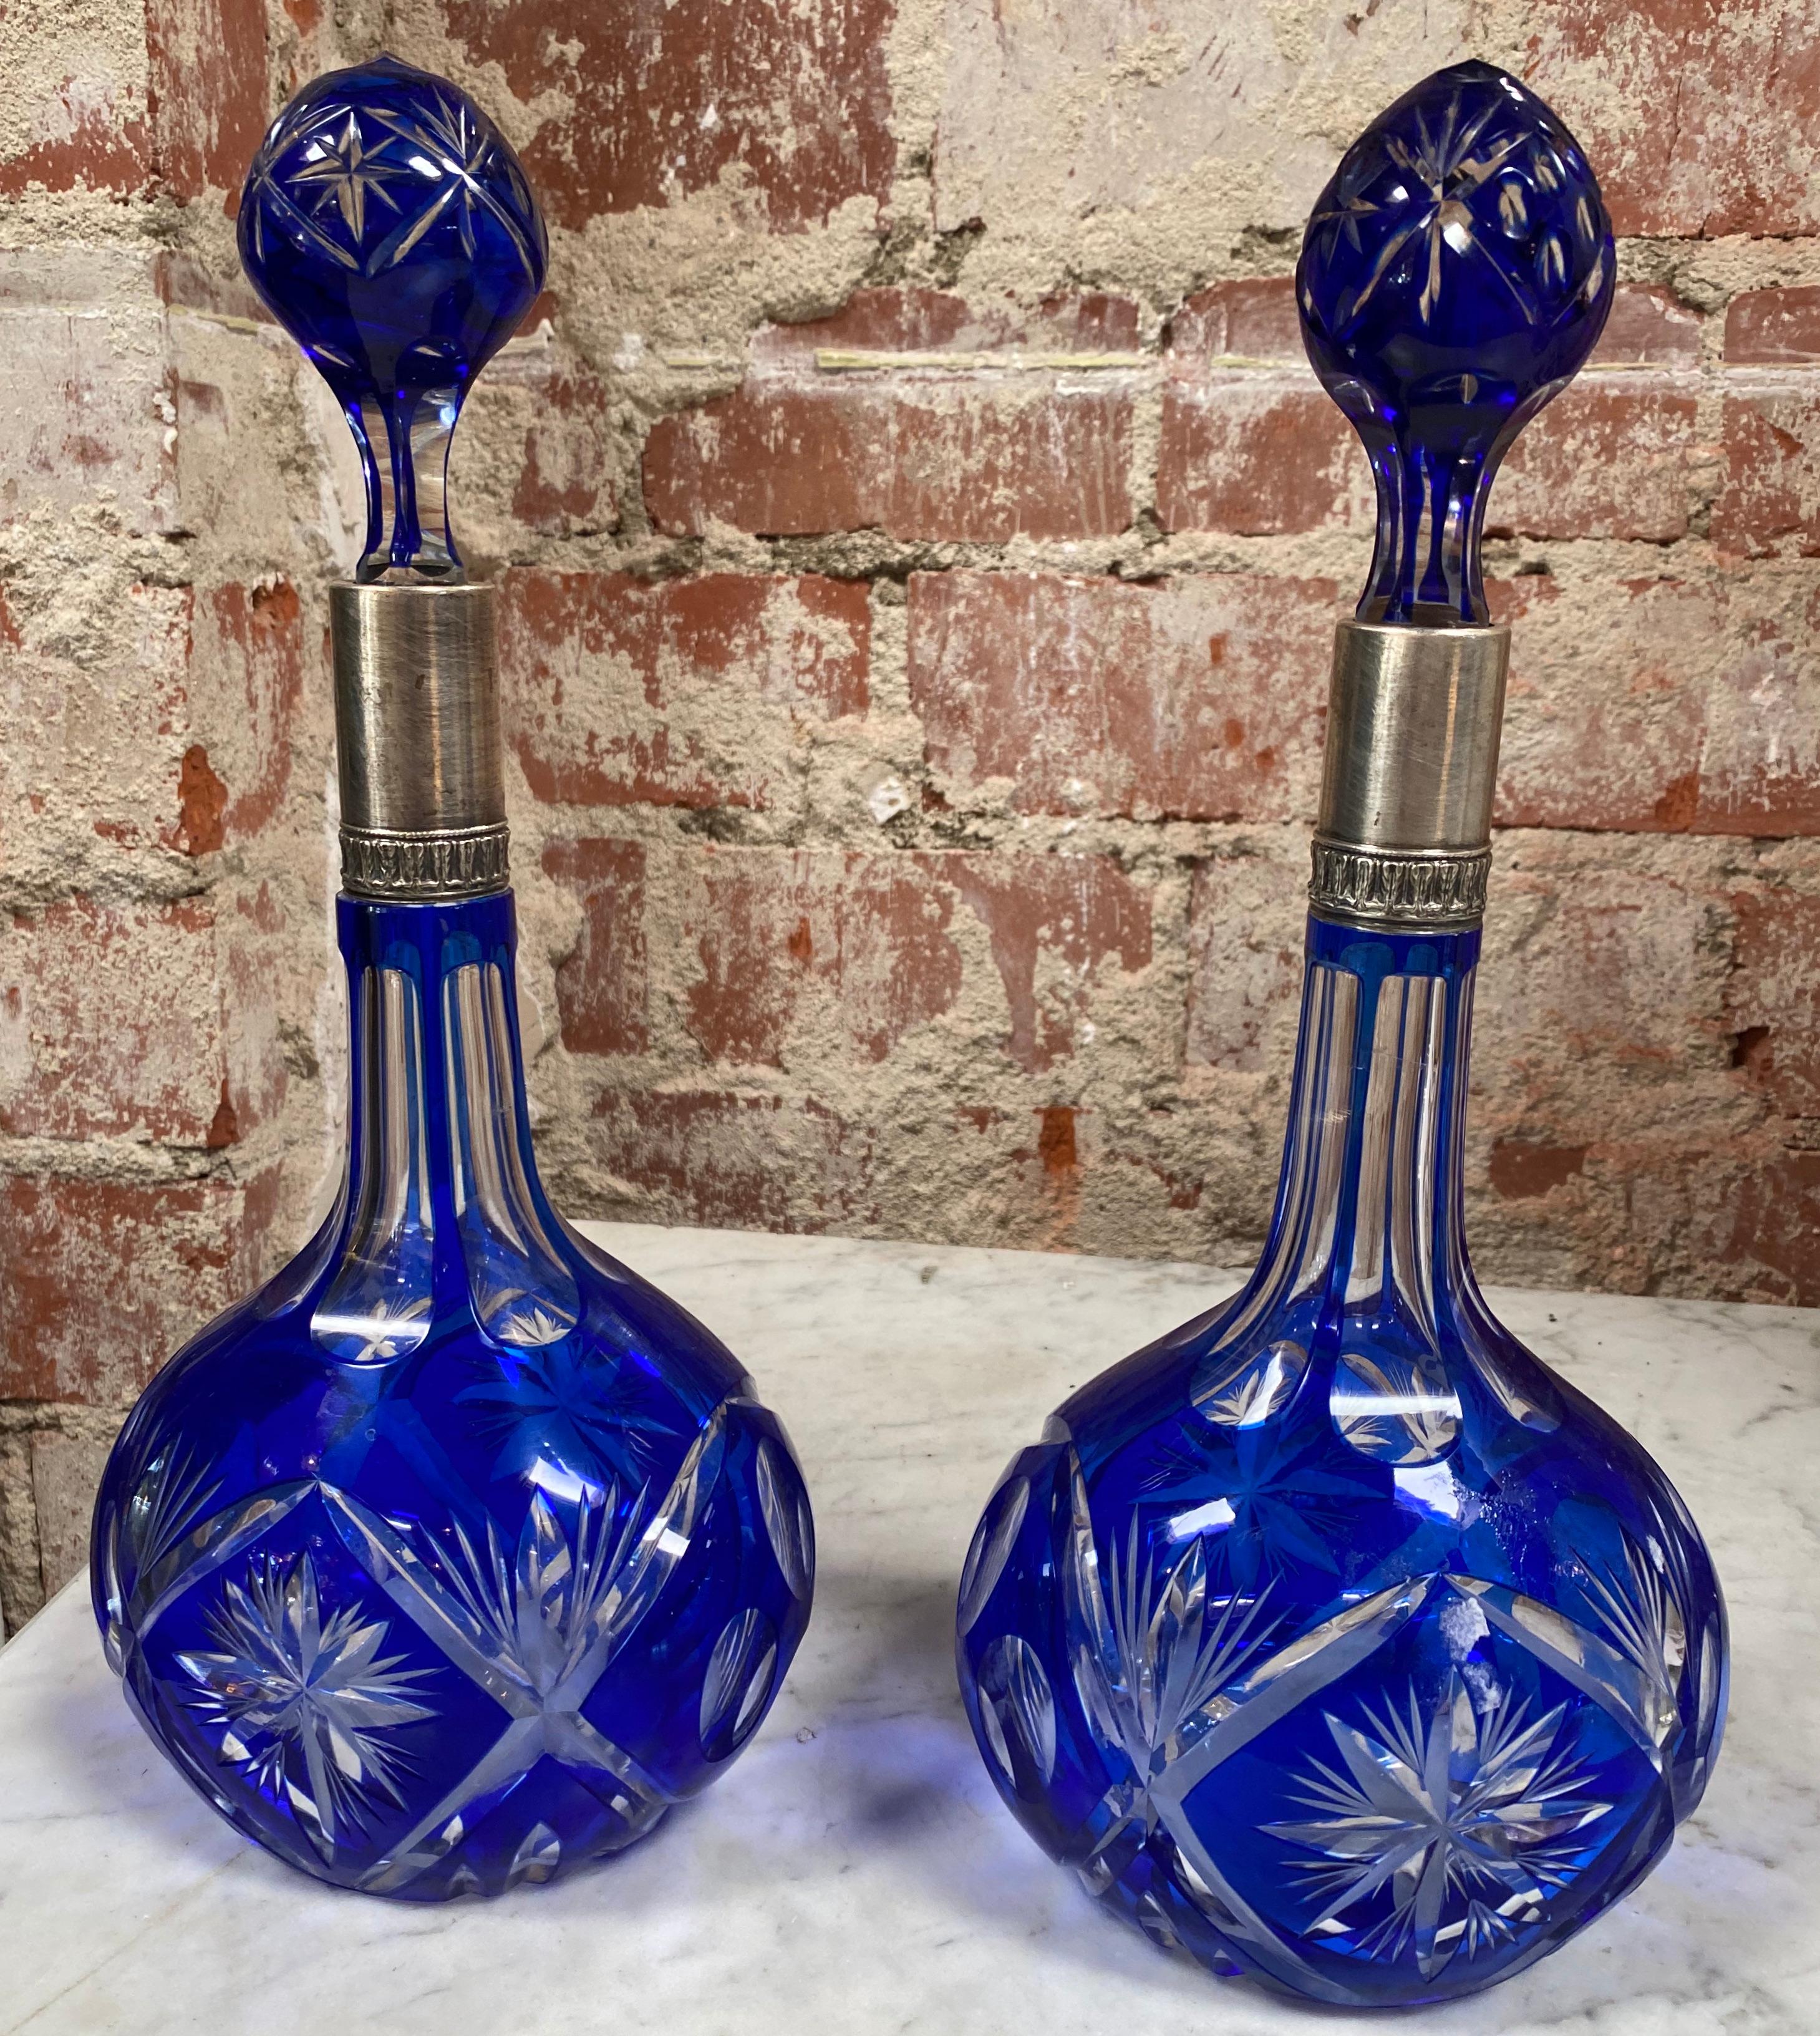 Stunning pair of two vintage bottel with art glass and silver top made in Italy, 1970s.